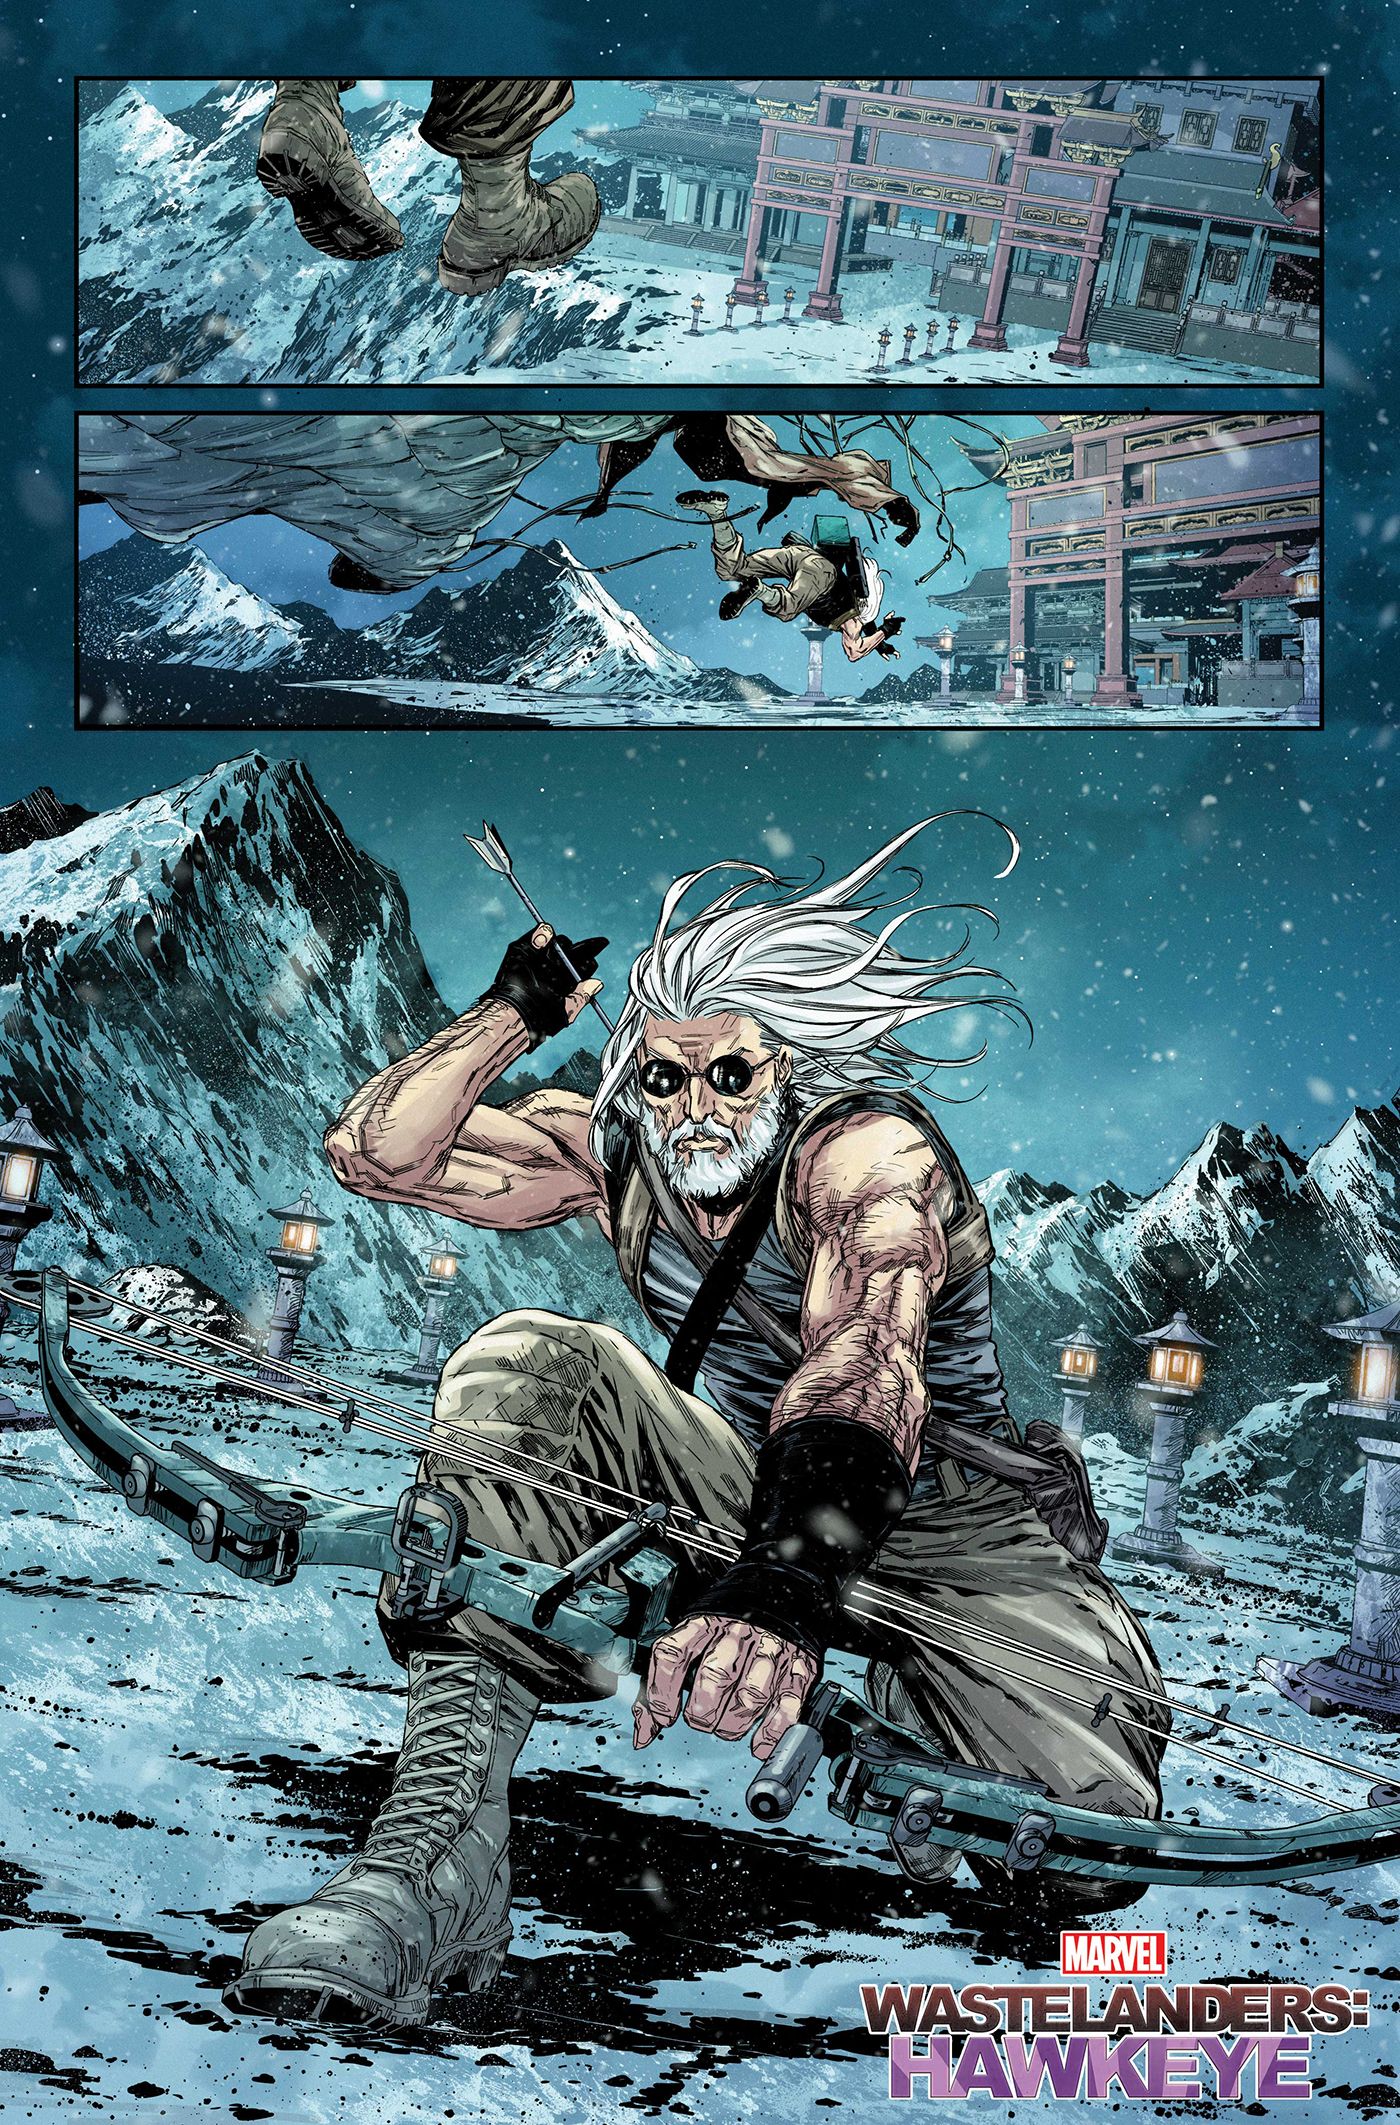 Old Man Hawkeye parachutes into a temple.